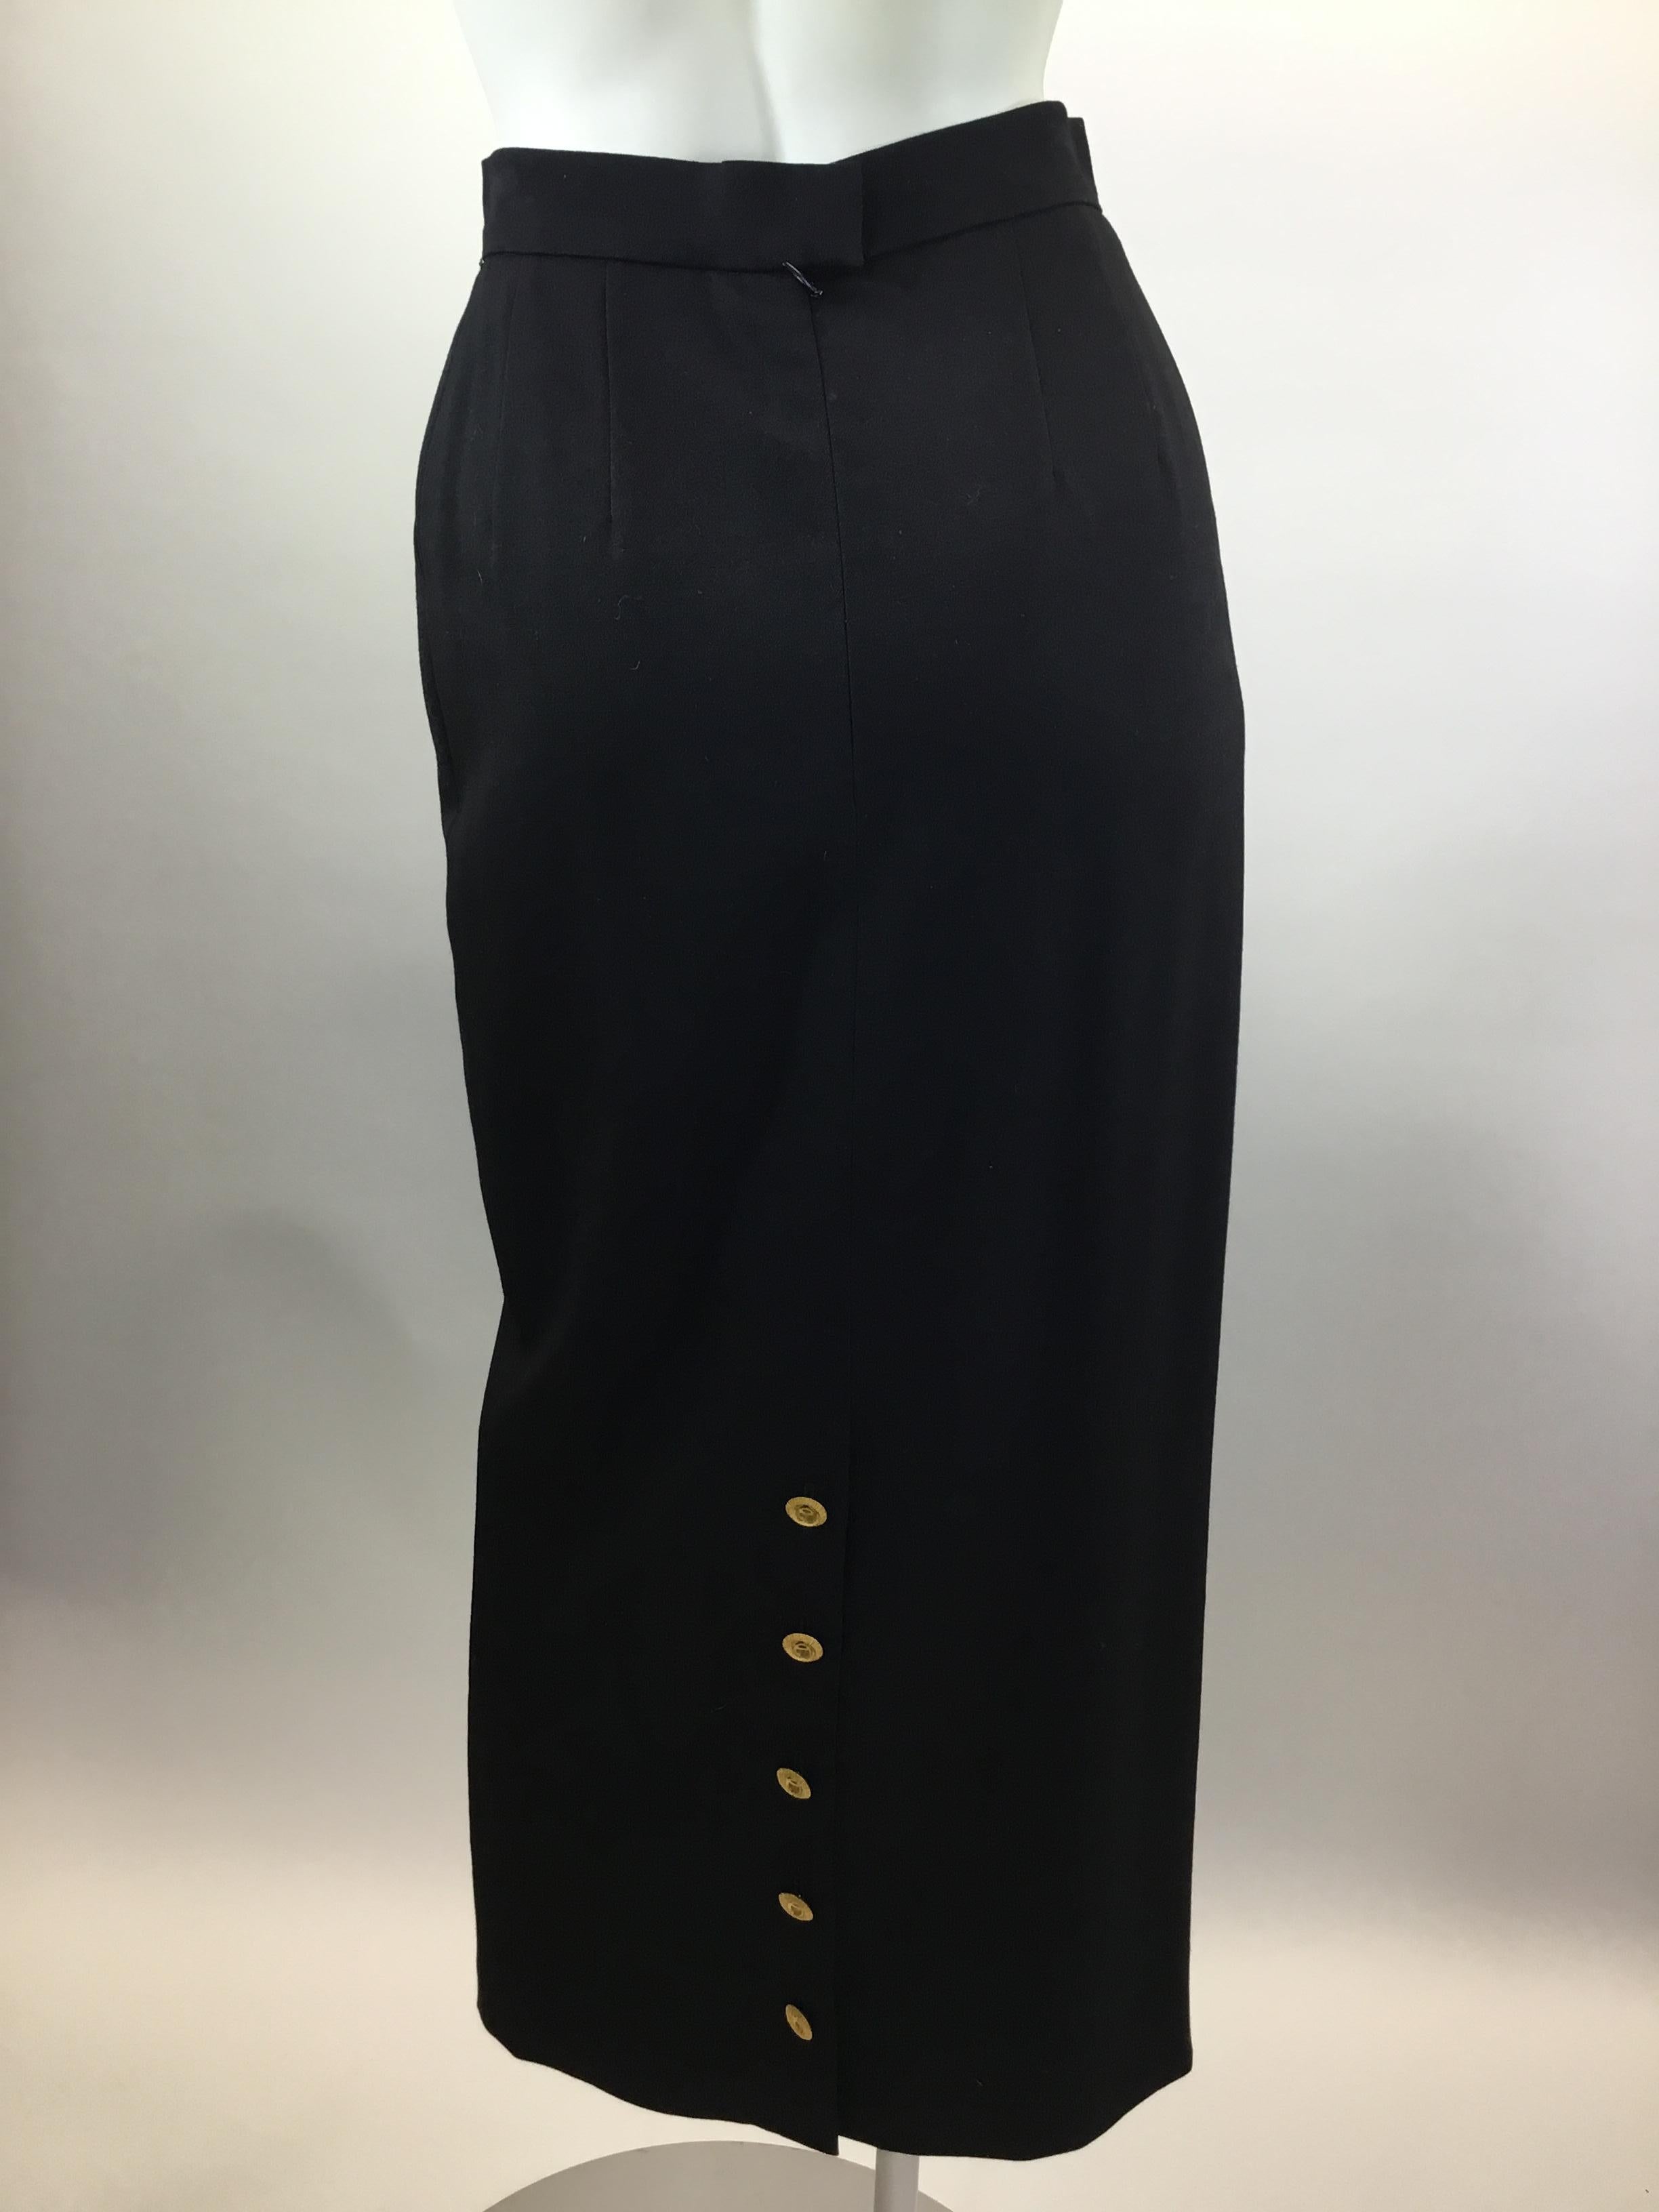 Chanel Black Mid-Length Skirt with Gold Buttons In Good Condition For Sale In Narberth, PA